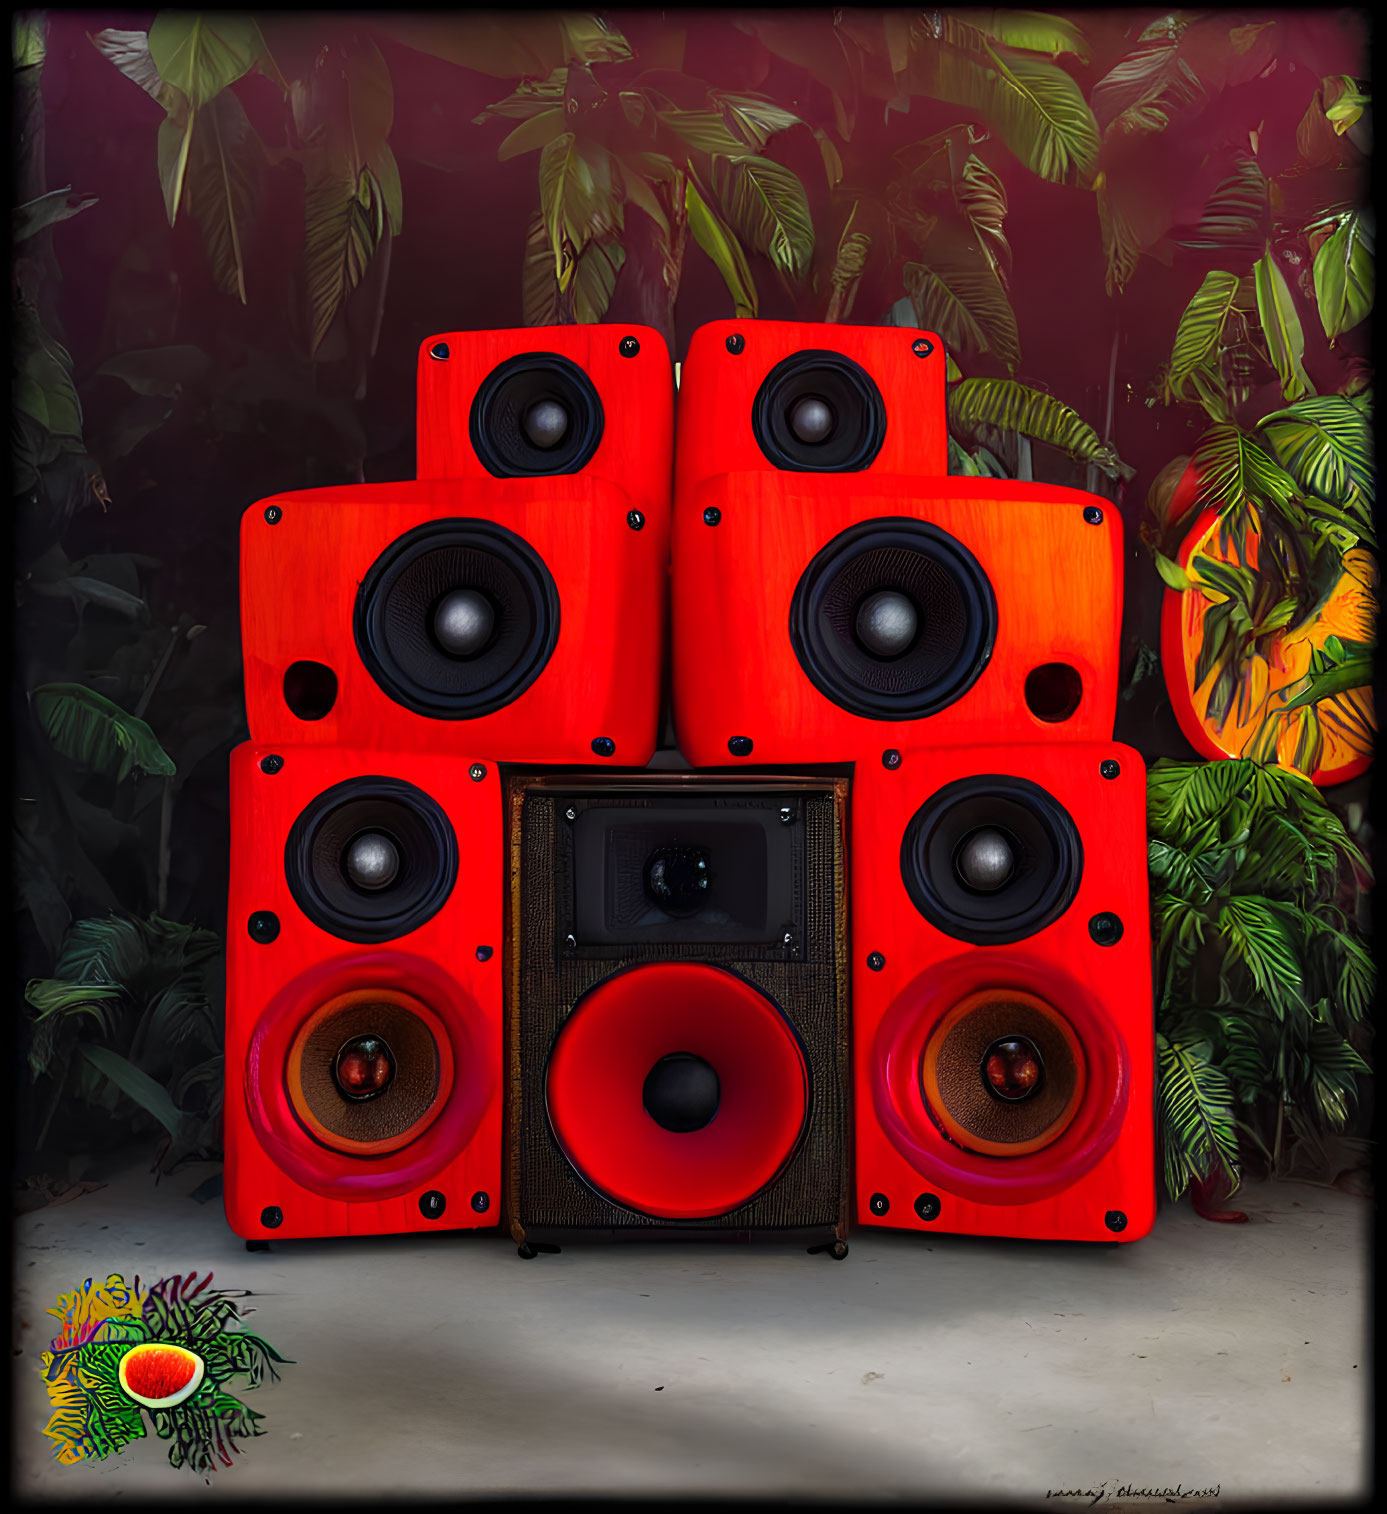 Red speaker system with subwoofer in lush green tropical setting